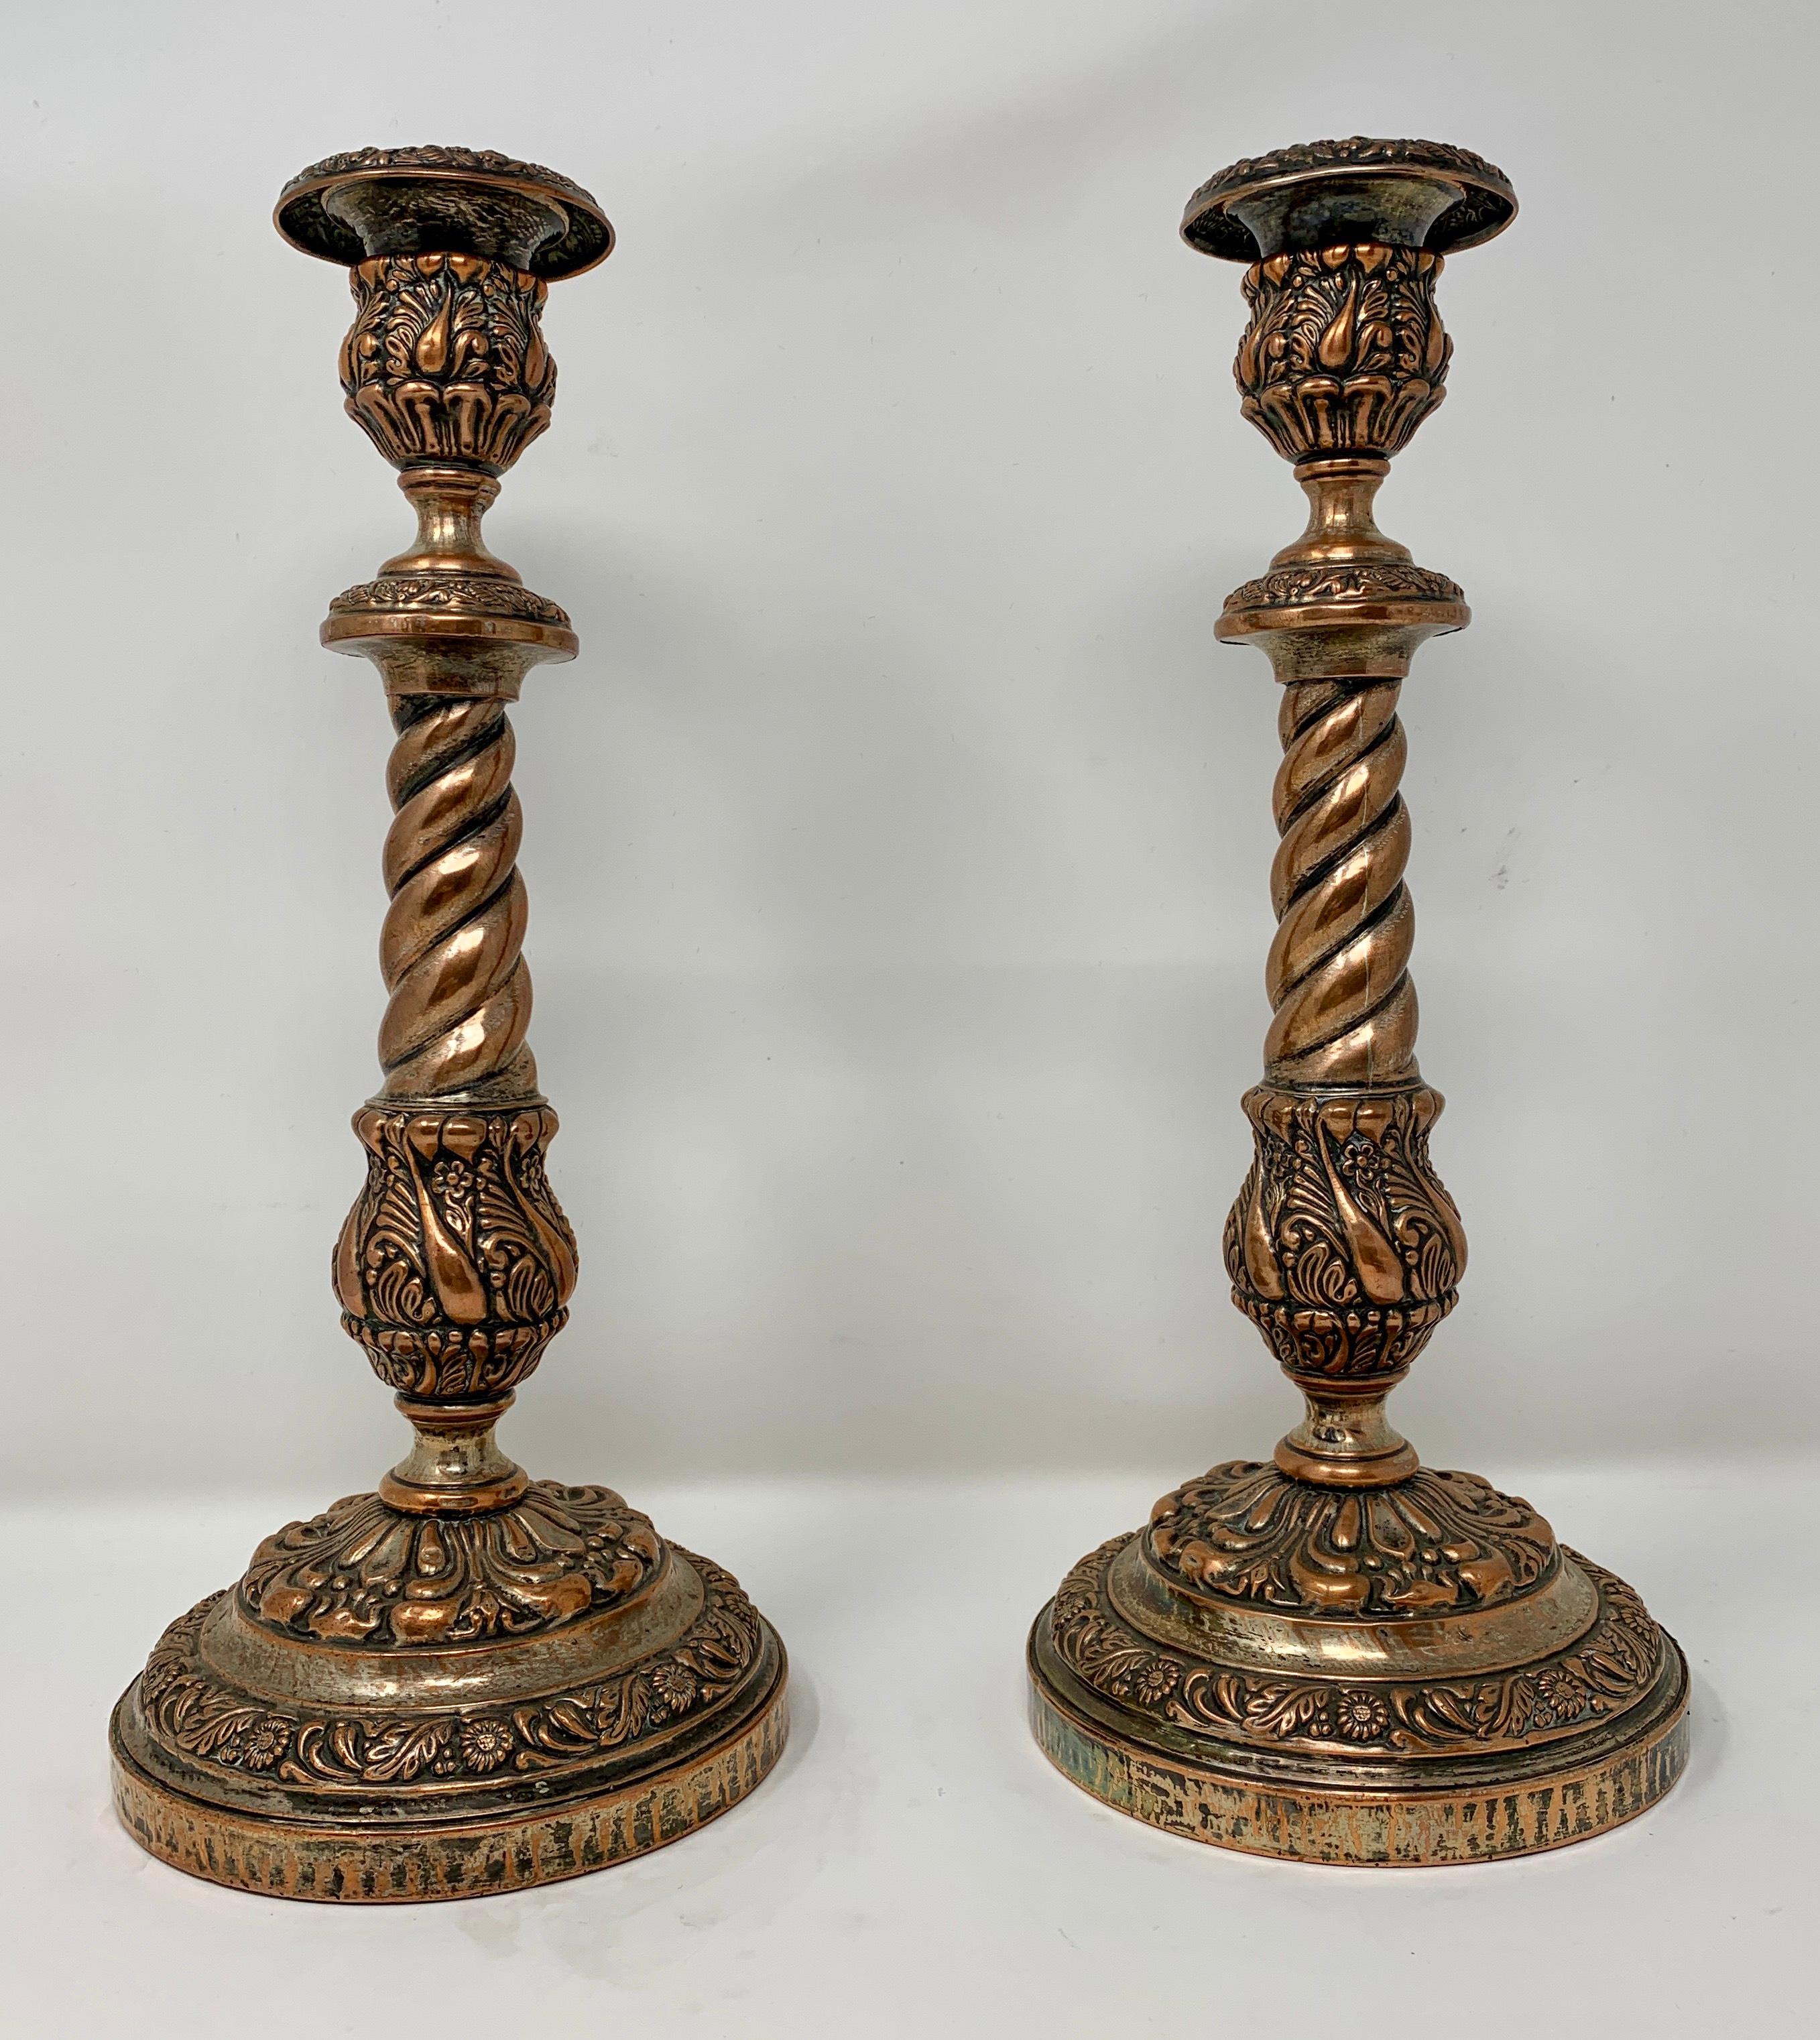 These candlesticks are particularly nice because they straddle the lines between formal and informal. Because of their copper base, they do not look too 